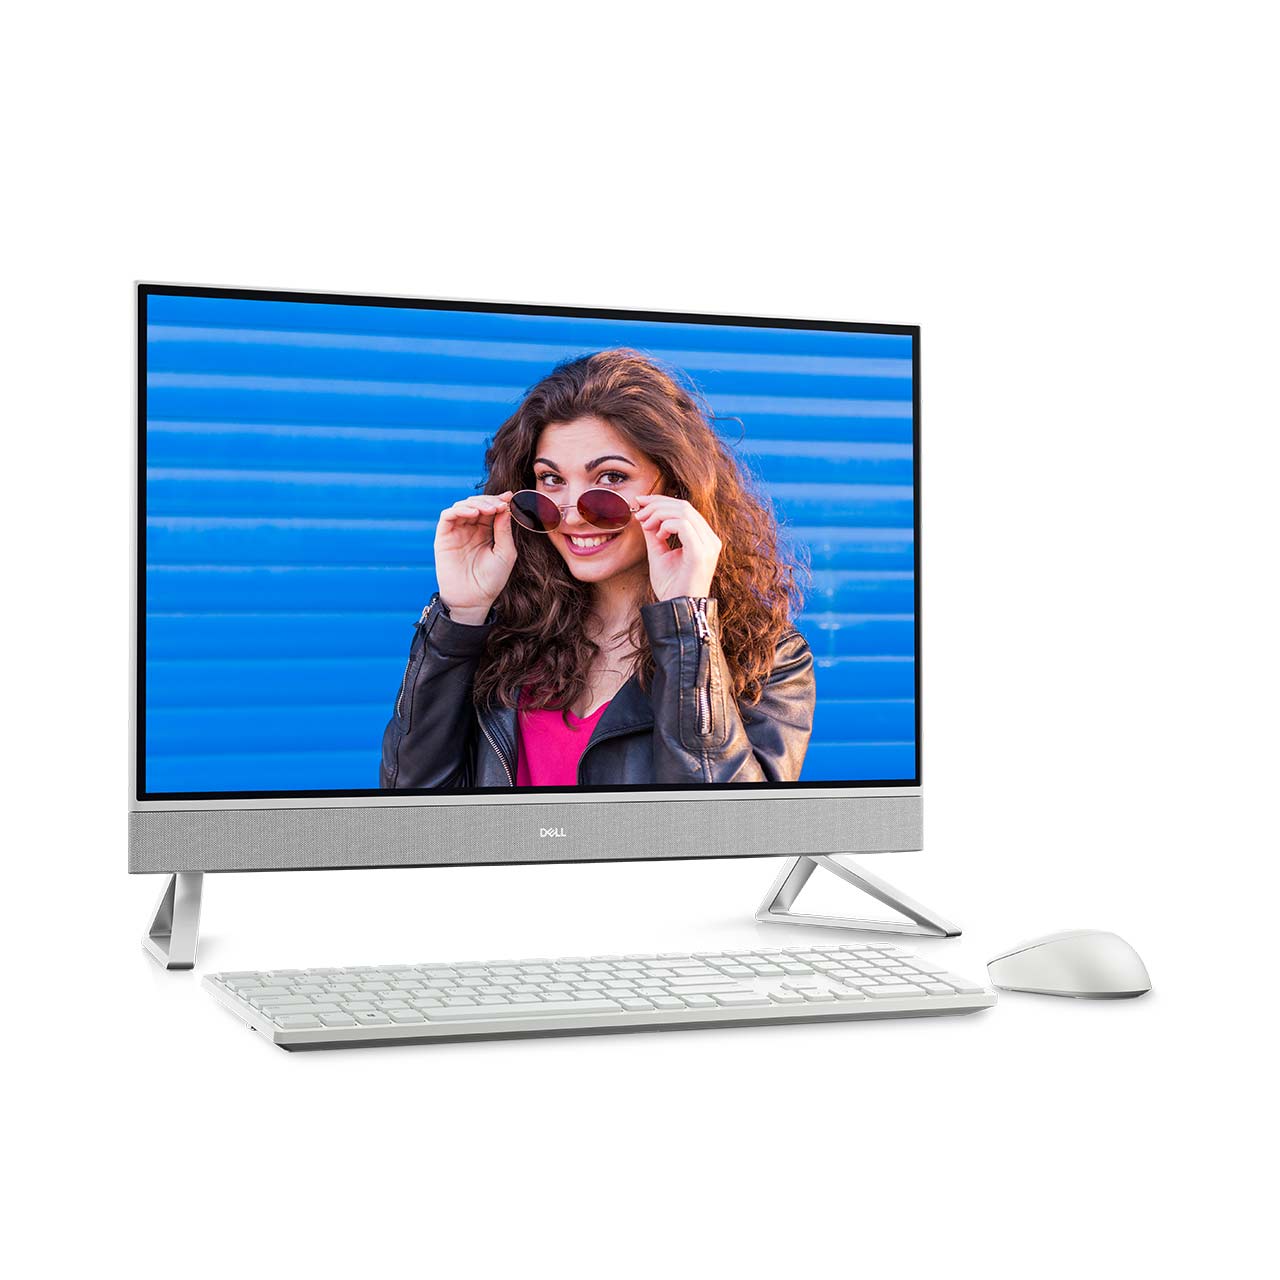 Inspiron 27 7000 (7710) All-in-One